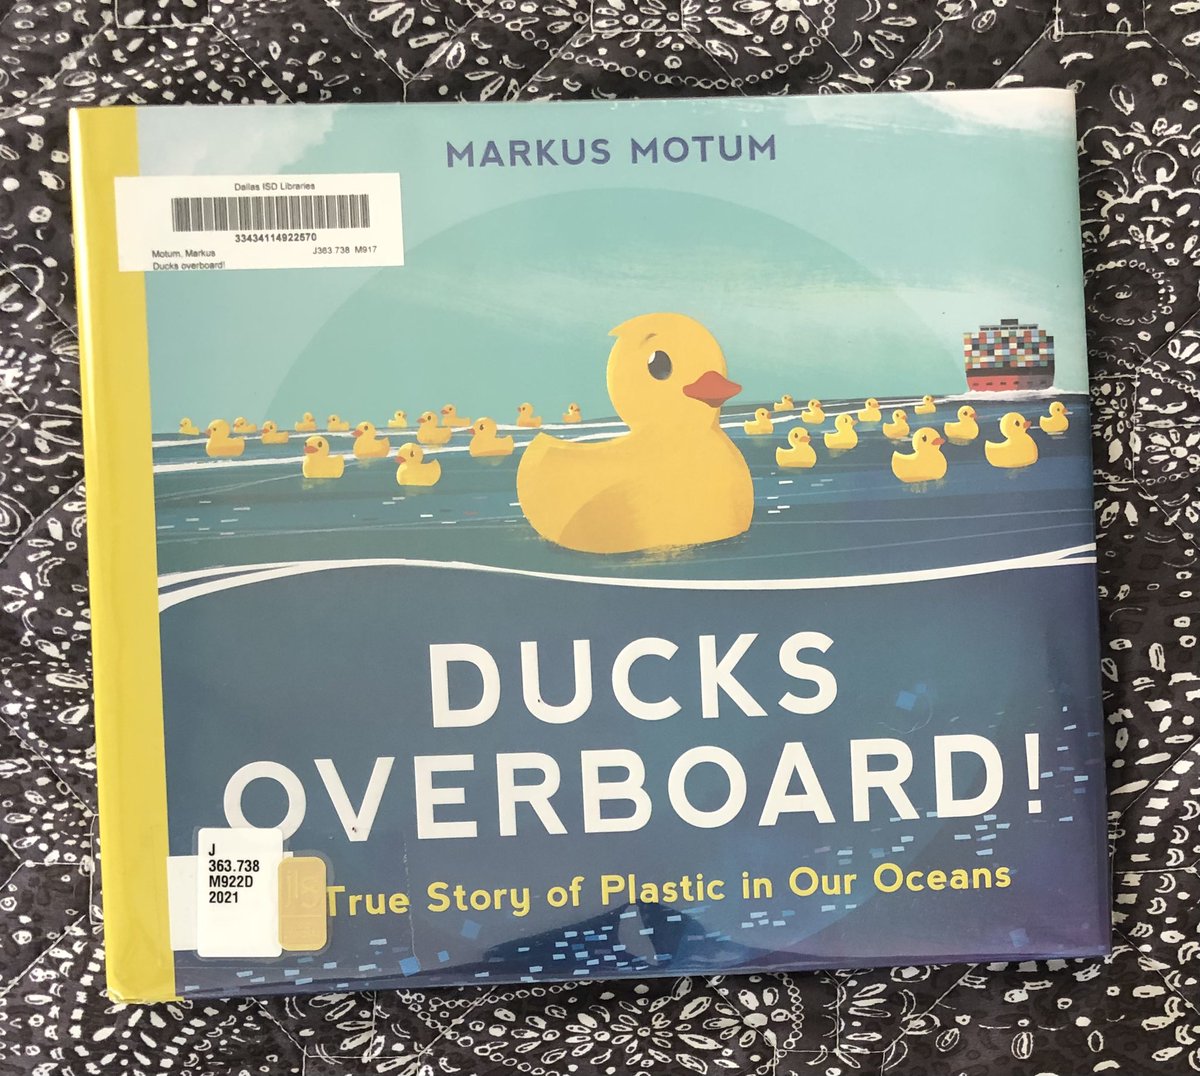 An every day rubber ducky falls out of its shipping container en route to USA. It observes many things, most notably the amount of plastic trash in the oceans. Energetic illustrations, plastic facts accompany the narrative. @markusmotum @DISD_Libraries #NFfriday #bookaday